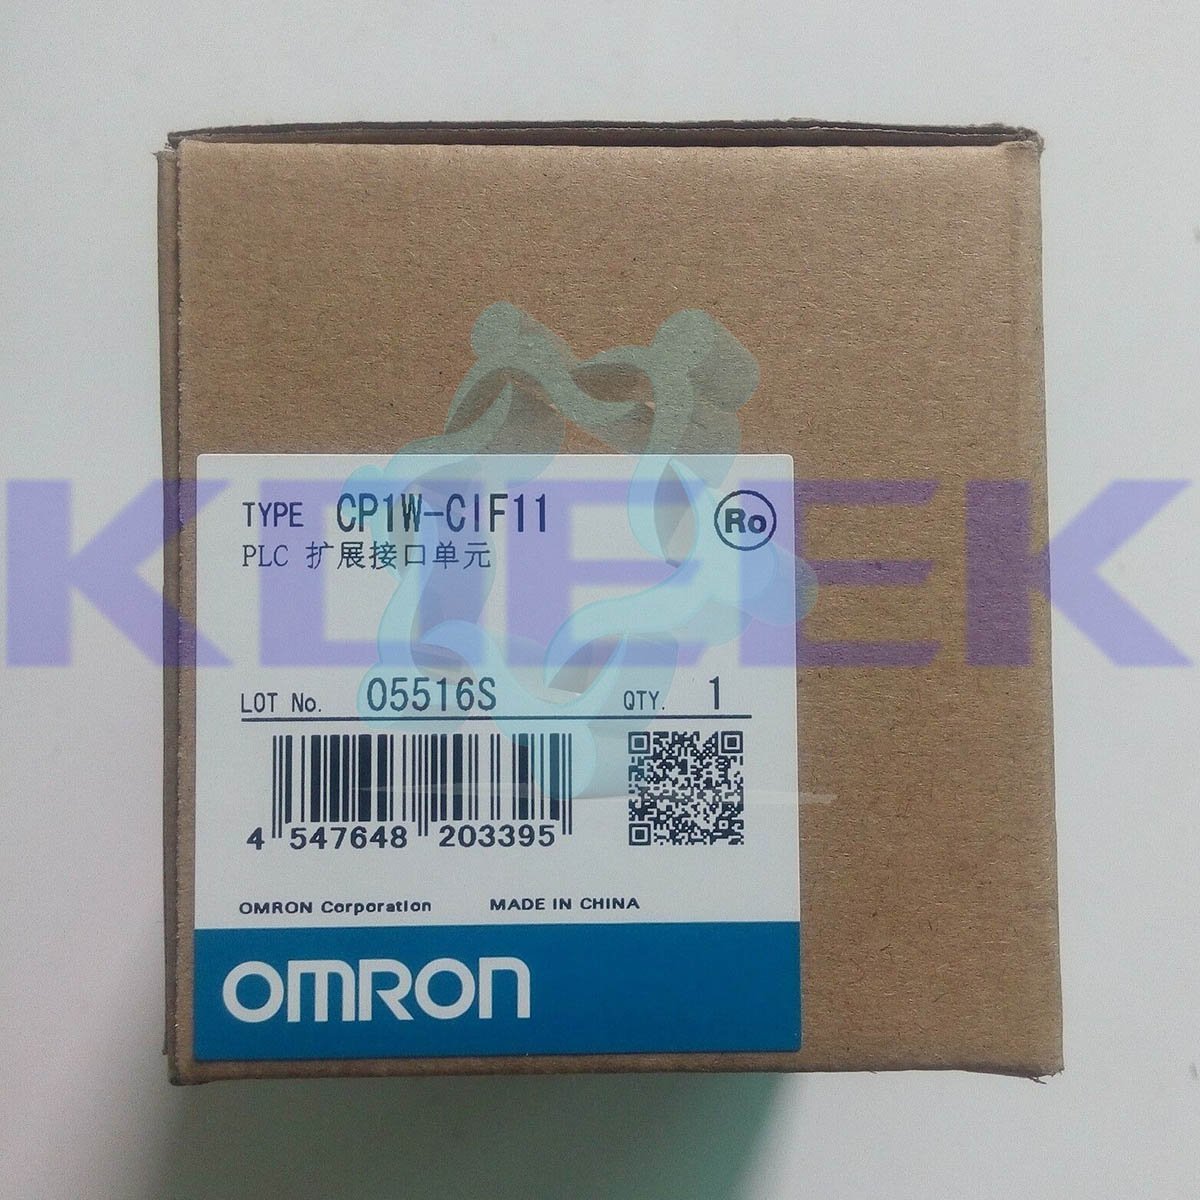 CP1W-CIF11 KOEED 1, 80%, import_2020_10_10_031751, Omron, Other